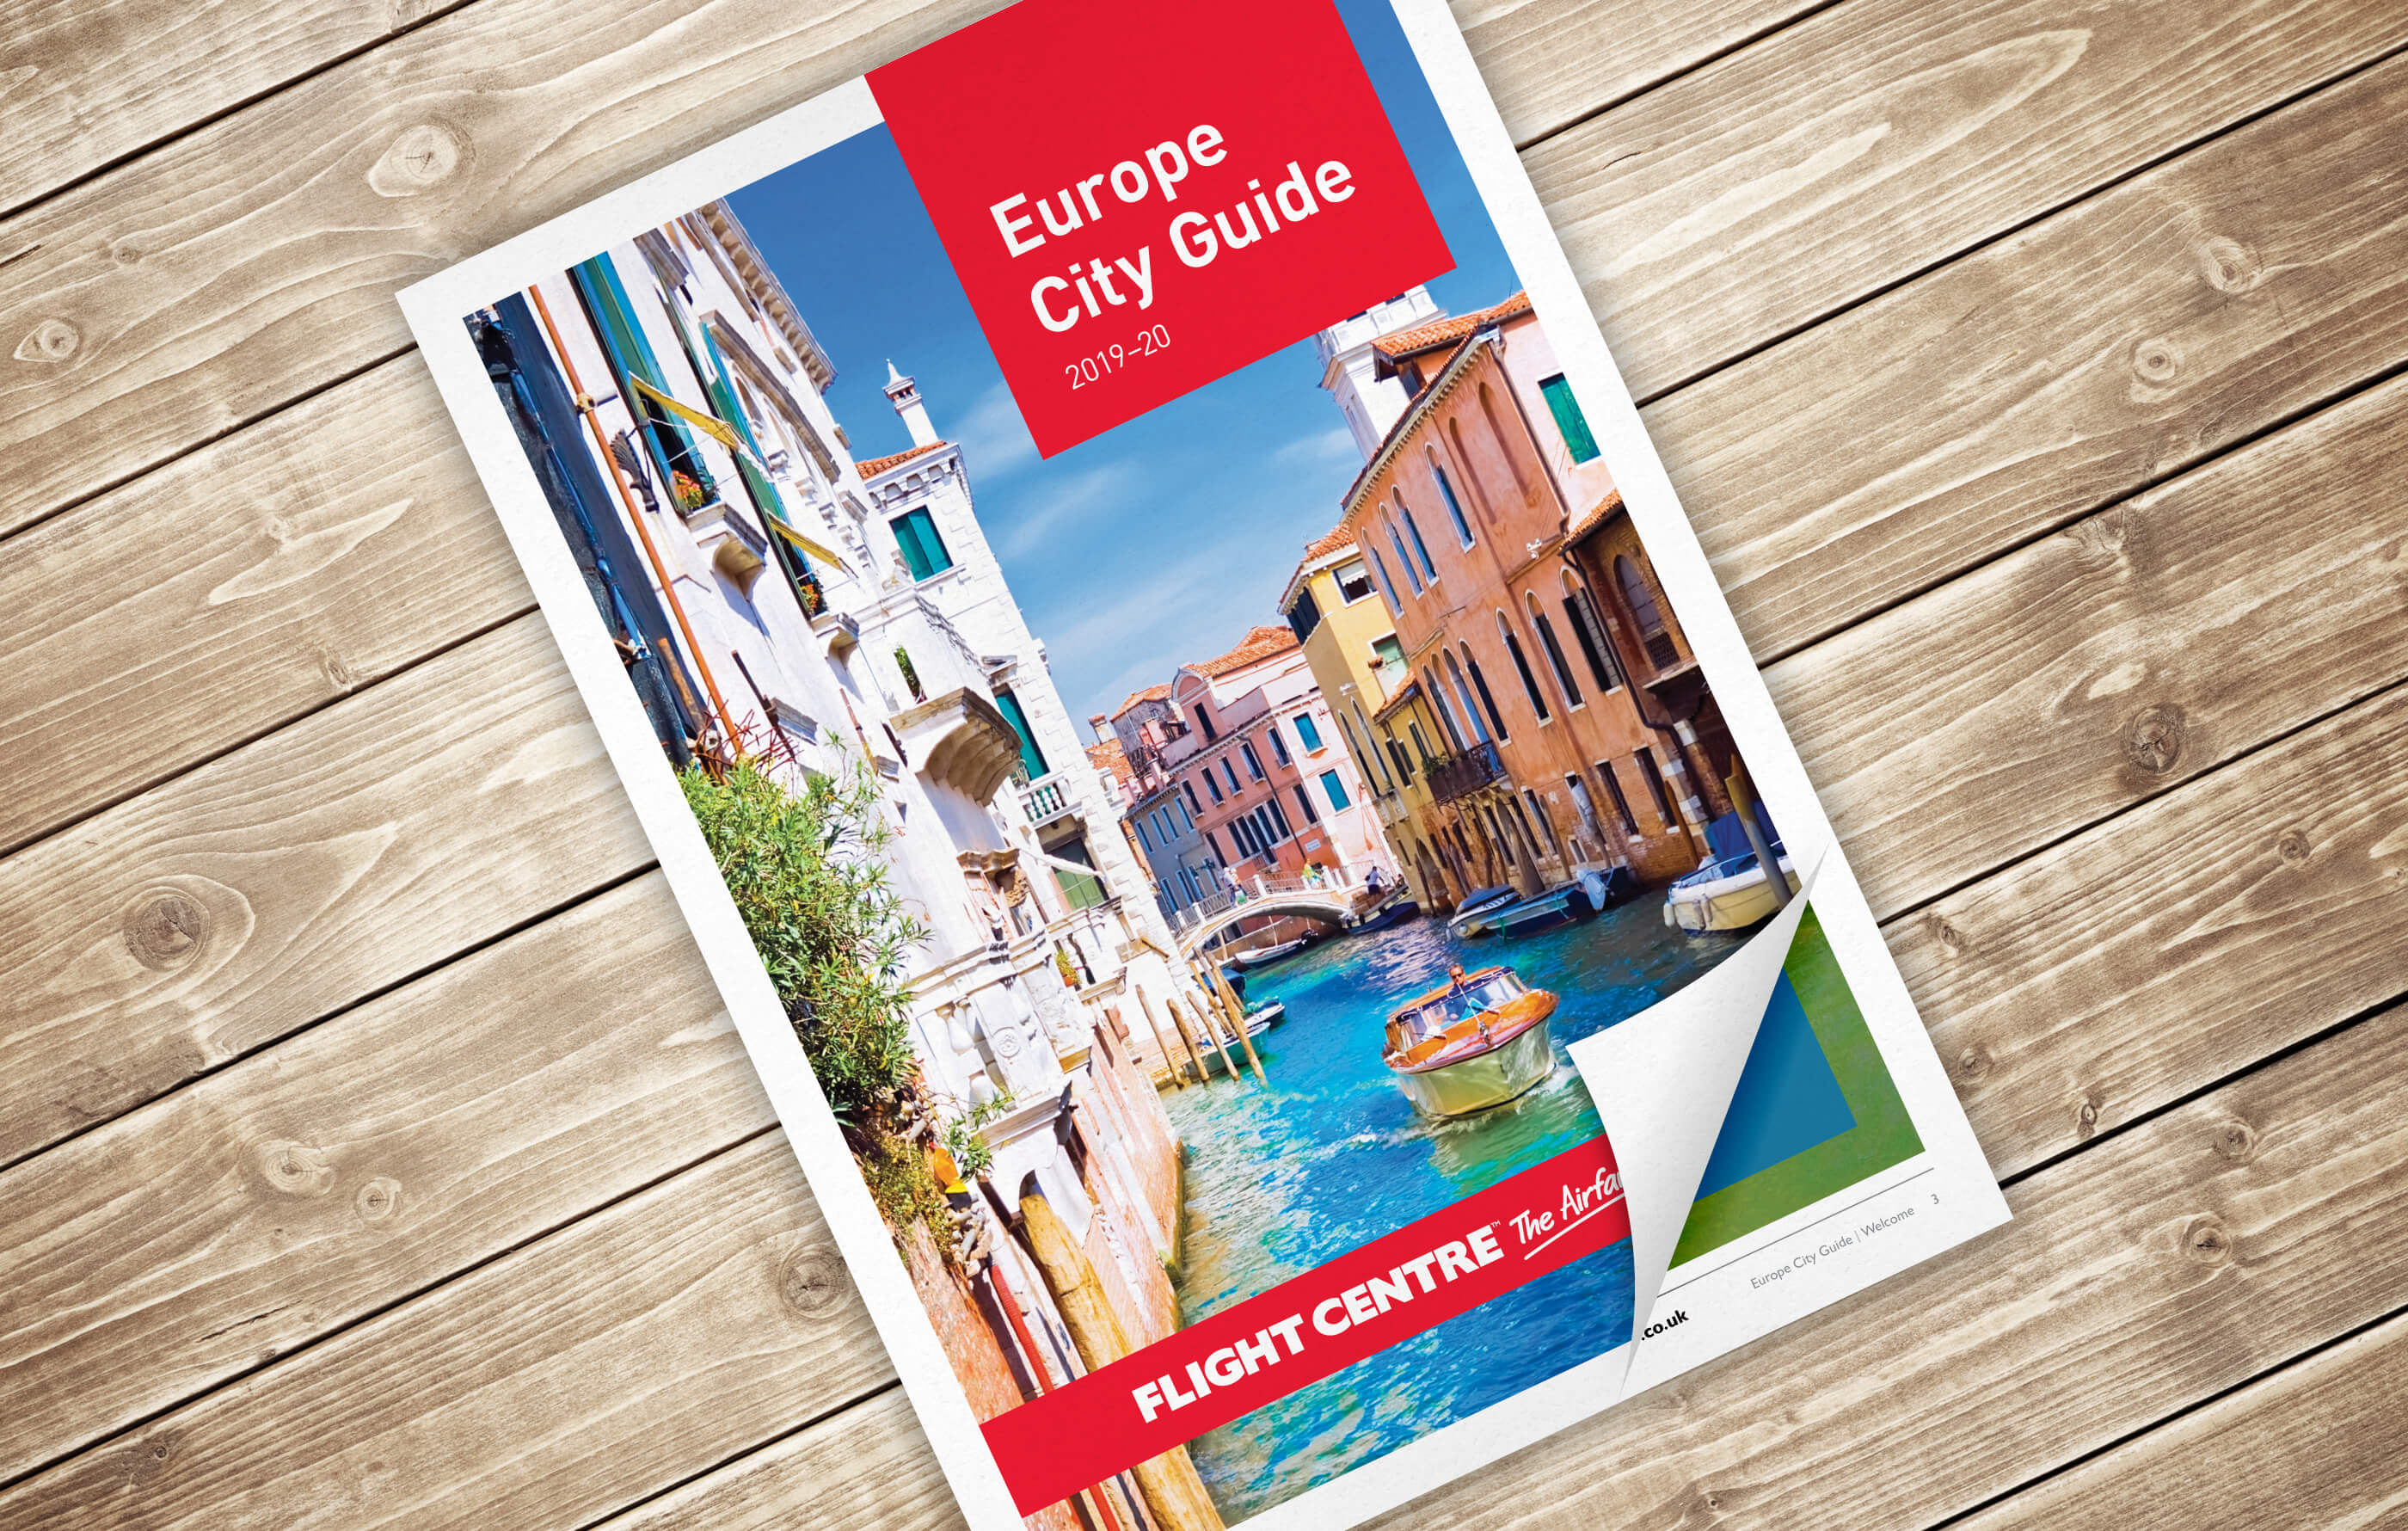 Europe City Guide brochure front cover, featuring a sunny shot of a canal in Venice with boats moared along its sides